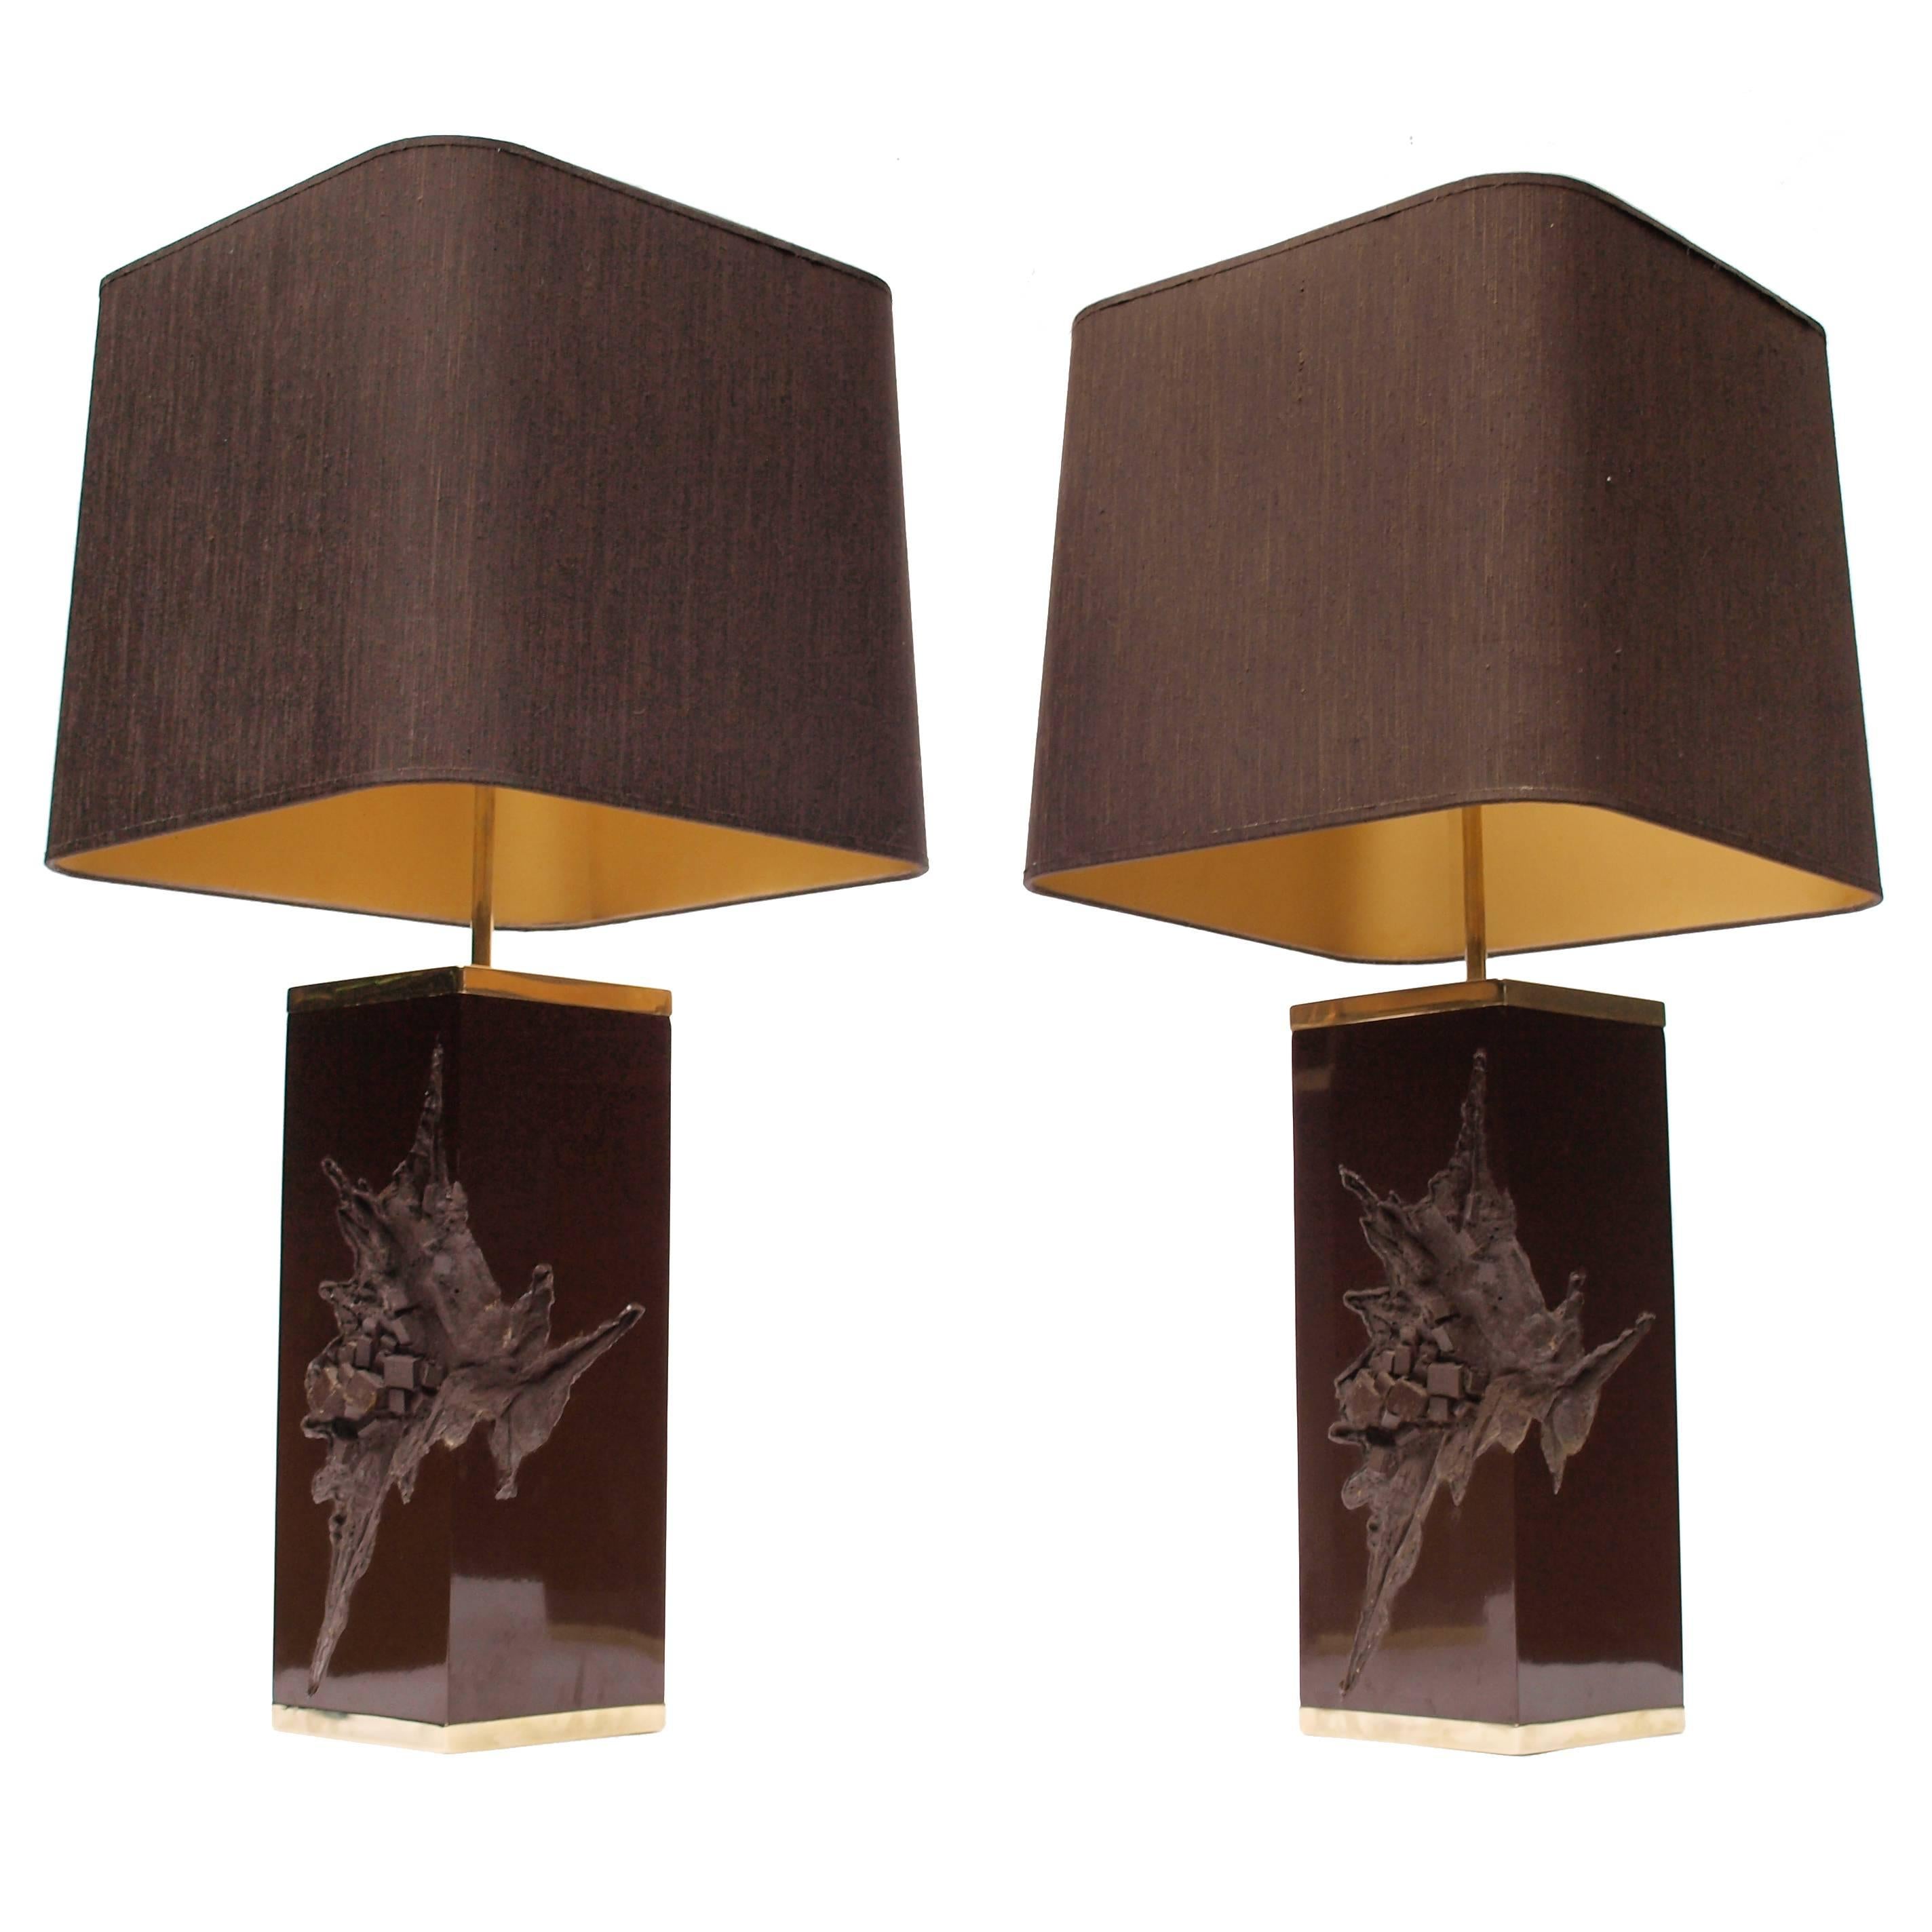 A grand pair of chocolate brown Philippe Cheverny lamps from the late 1970s cast in resin and cased on the top and bottom in gold metal edging. Finished with beautiful extending brass finials. With brown silk, gold lined lampshades.
  